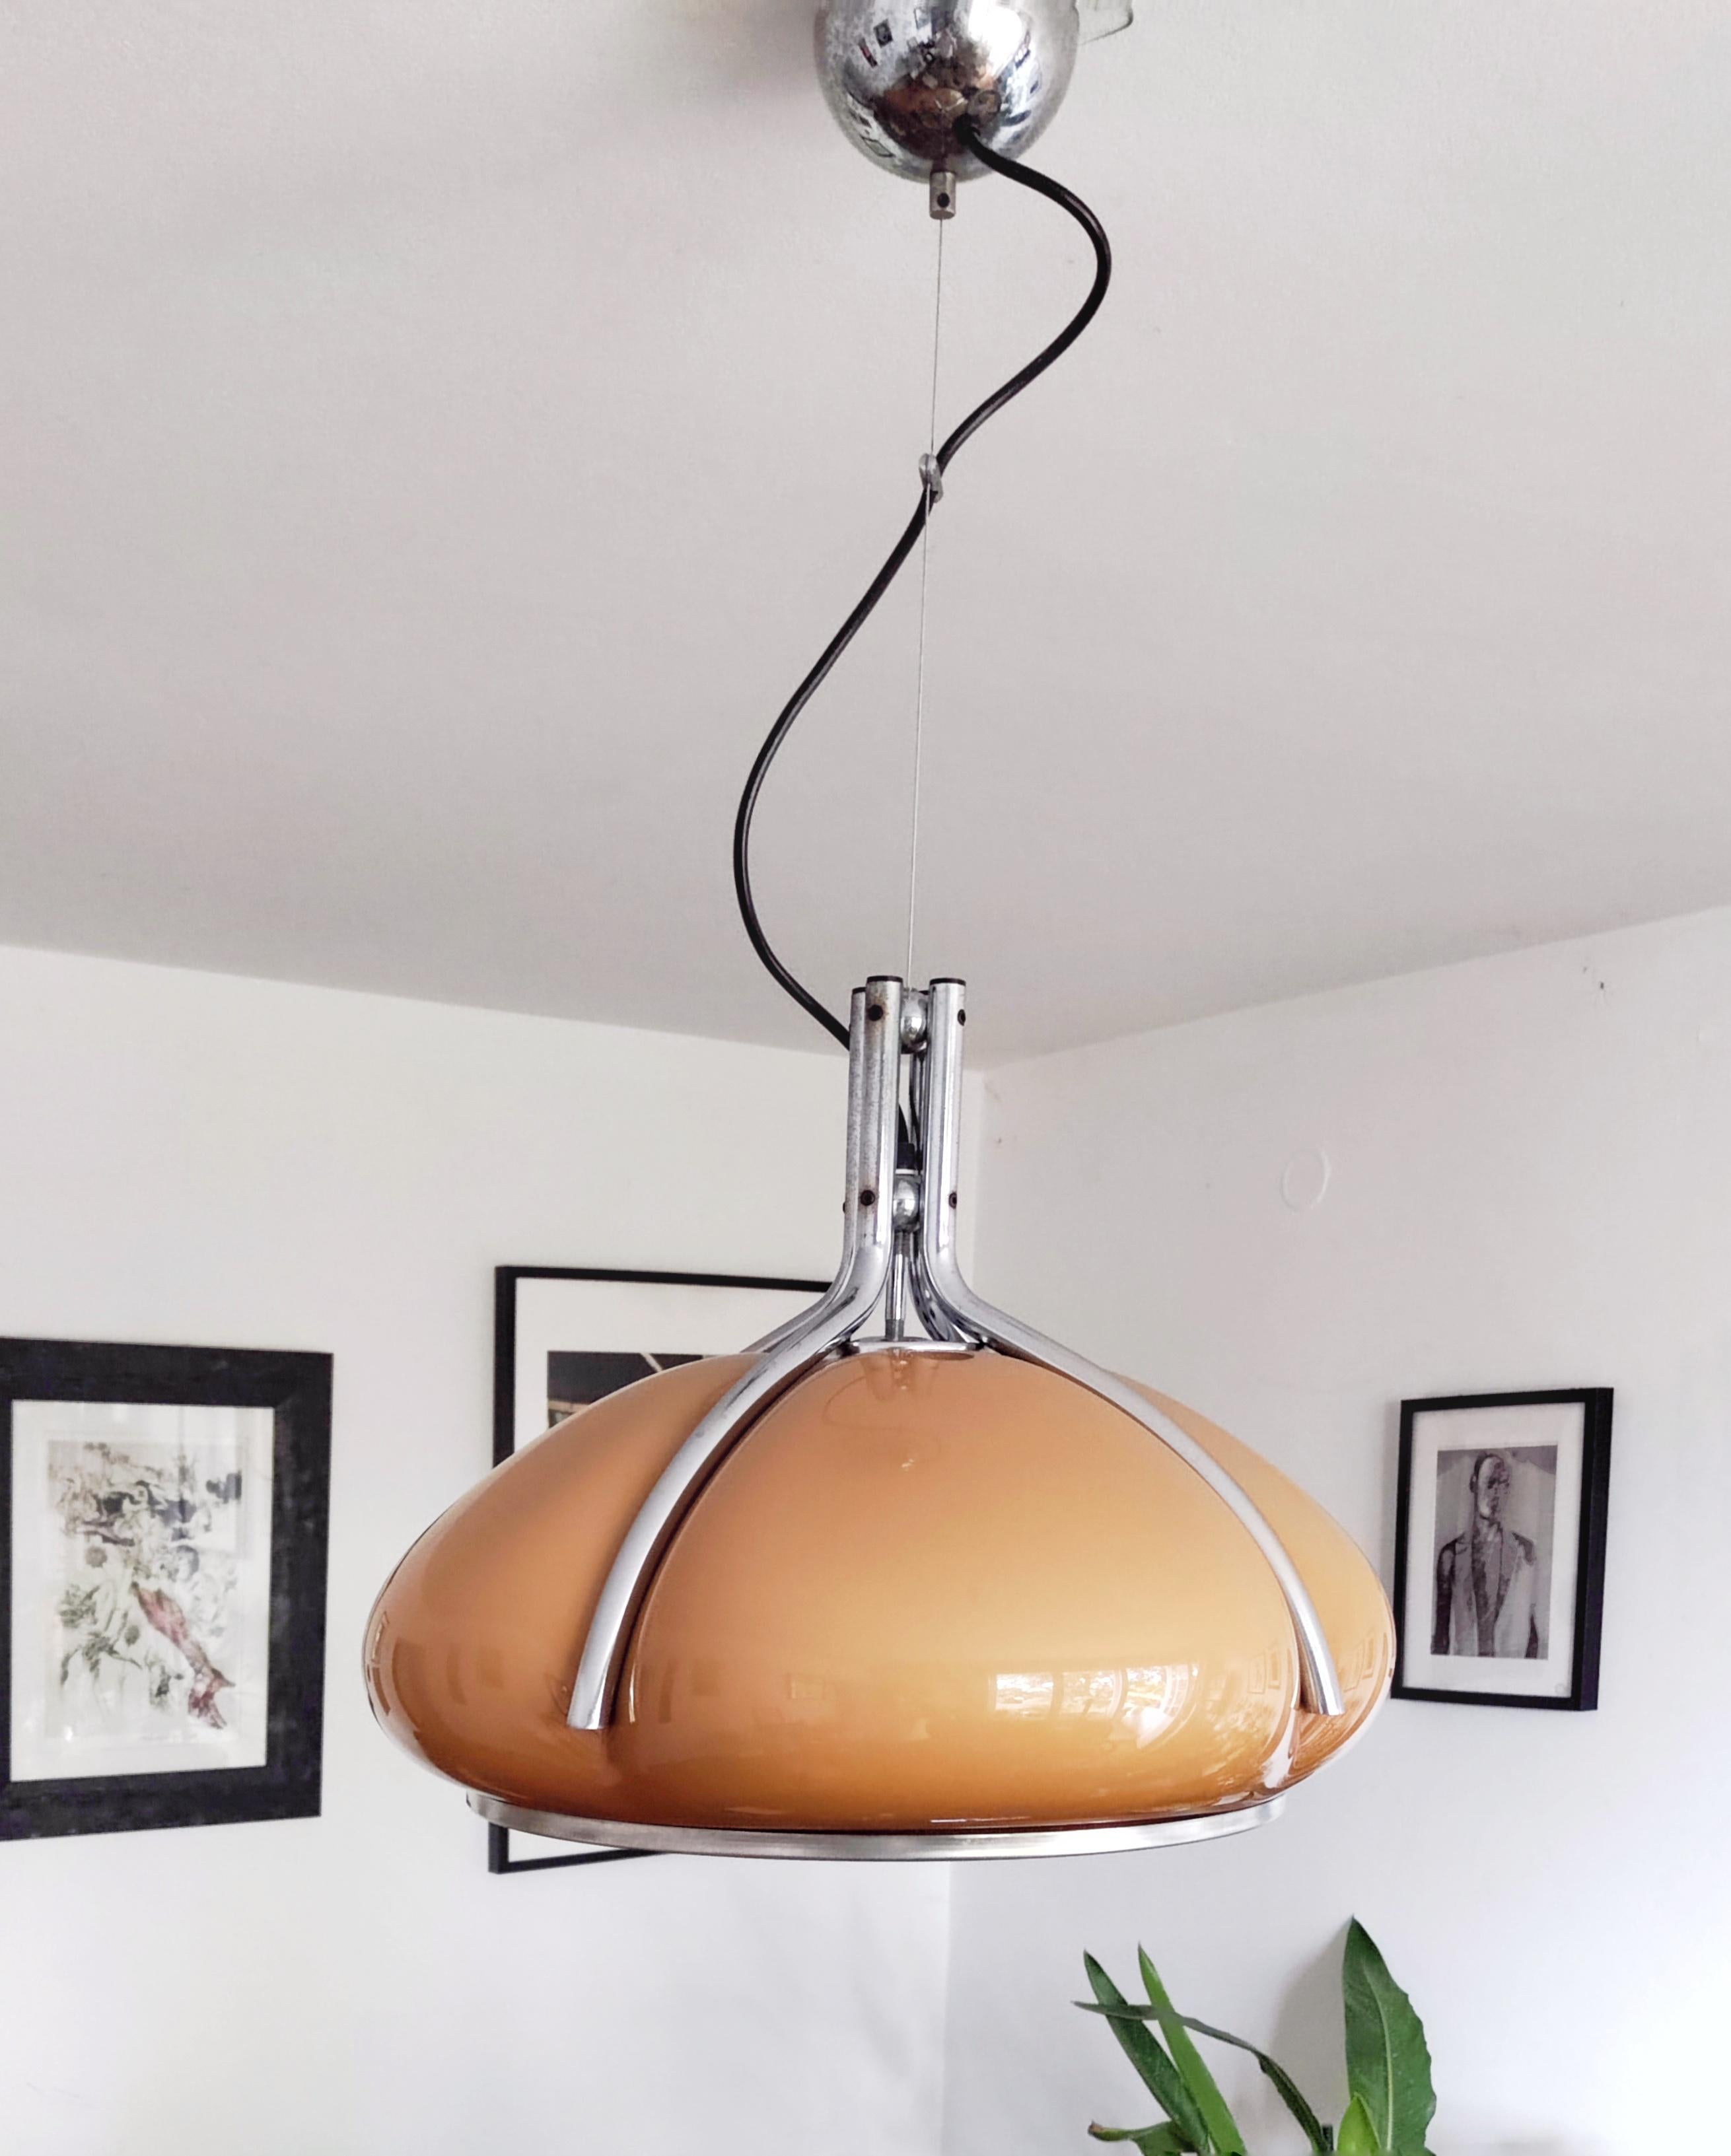 In this listing you will find the iconic and very elegant Mid-Century Modern pendant lamp or hanging light Quadrifoglio in biomorphic shape.

It was designed by Gae Aulenti for Harvey Guzzini in 1960s, Italy, it is an eye catching light object.

